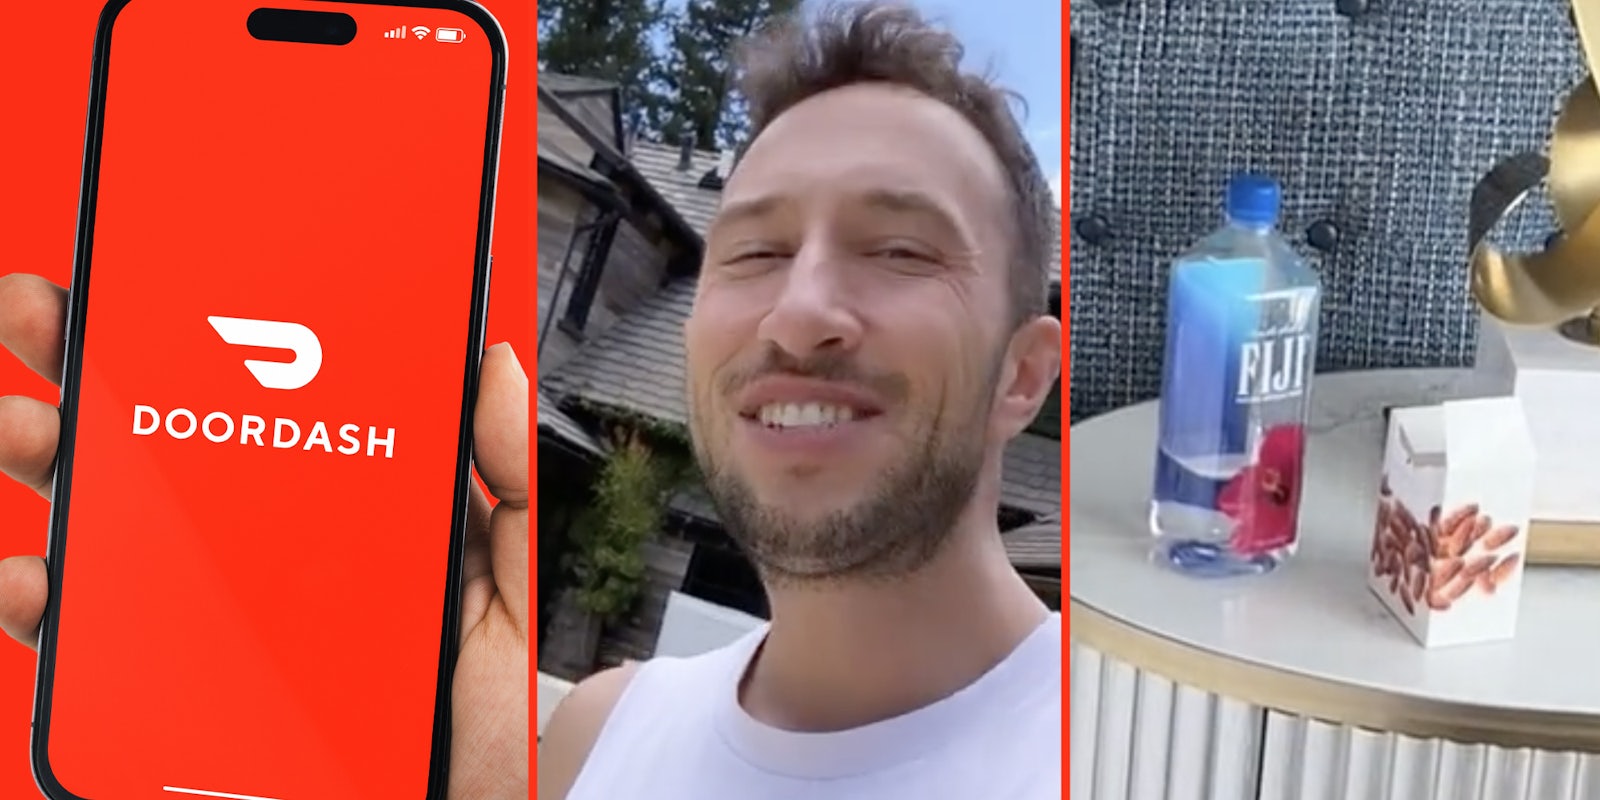 Phone with door dash app(l), Man smiling(c), Water and coffee(r)